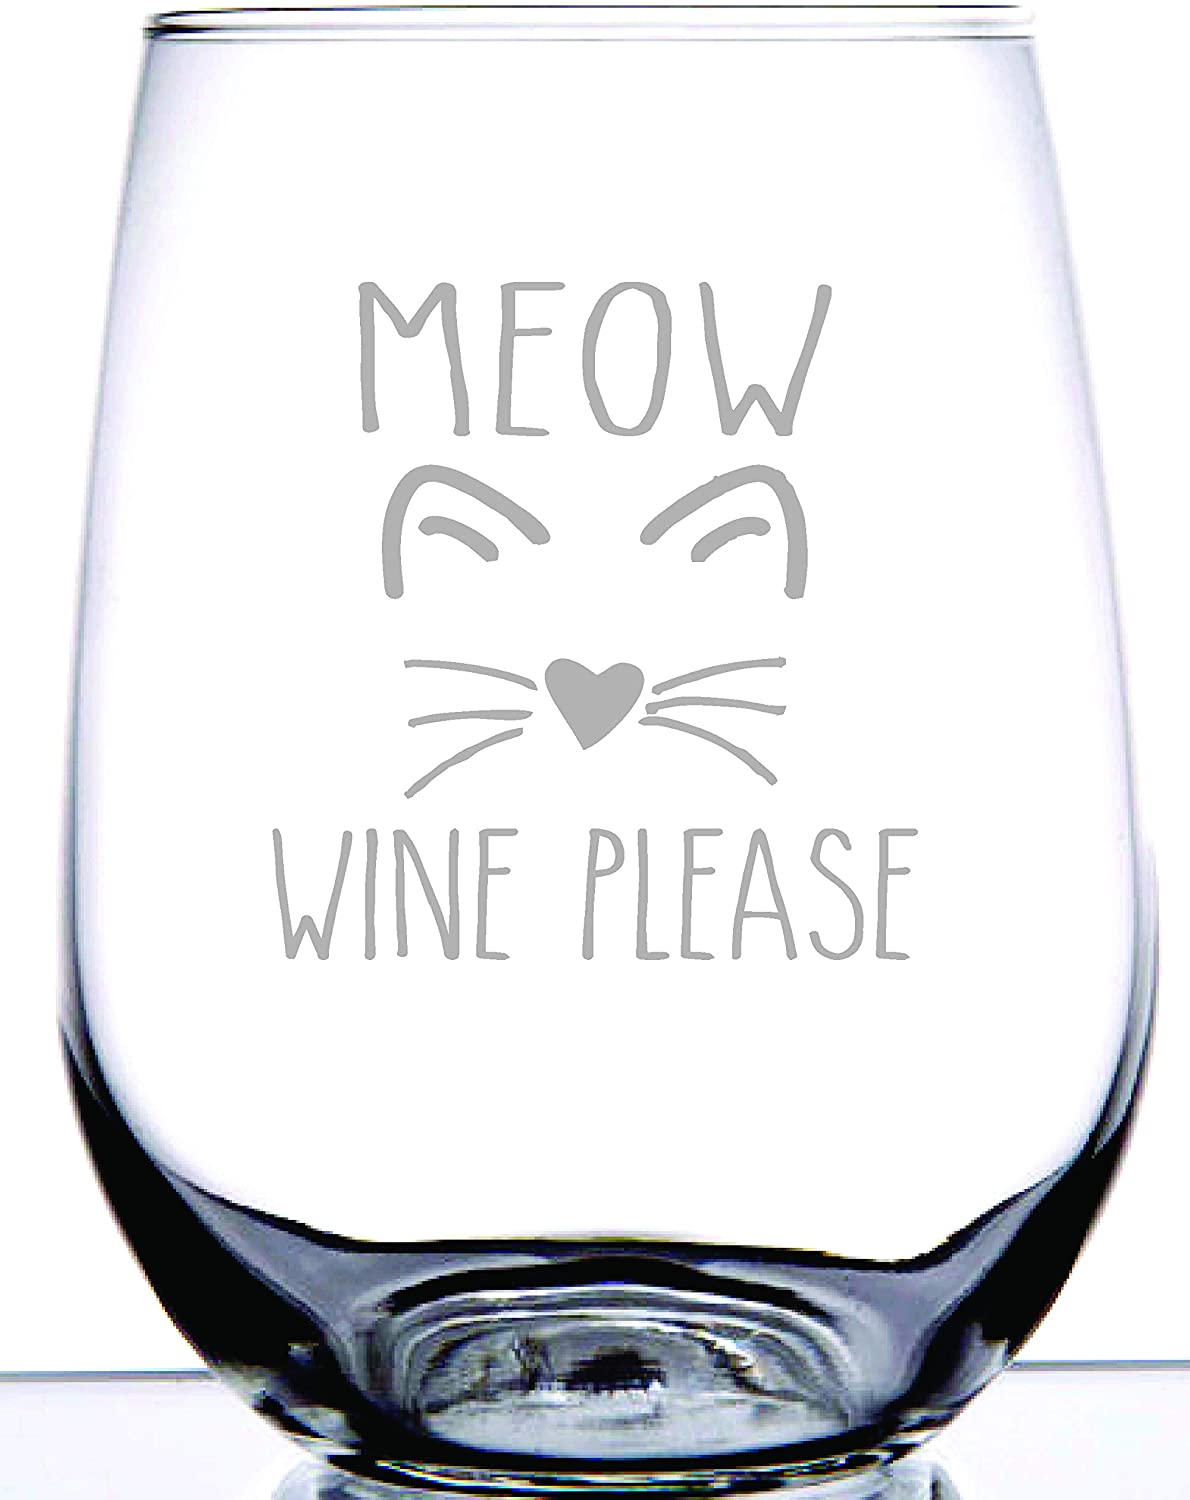 Meow Wine Please stemless wine glass | Fun gift for Cat lover | Unique gift for friends and family | Permanently laser etched | Evening mug